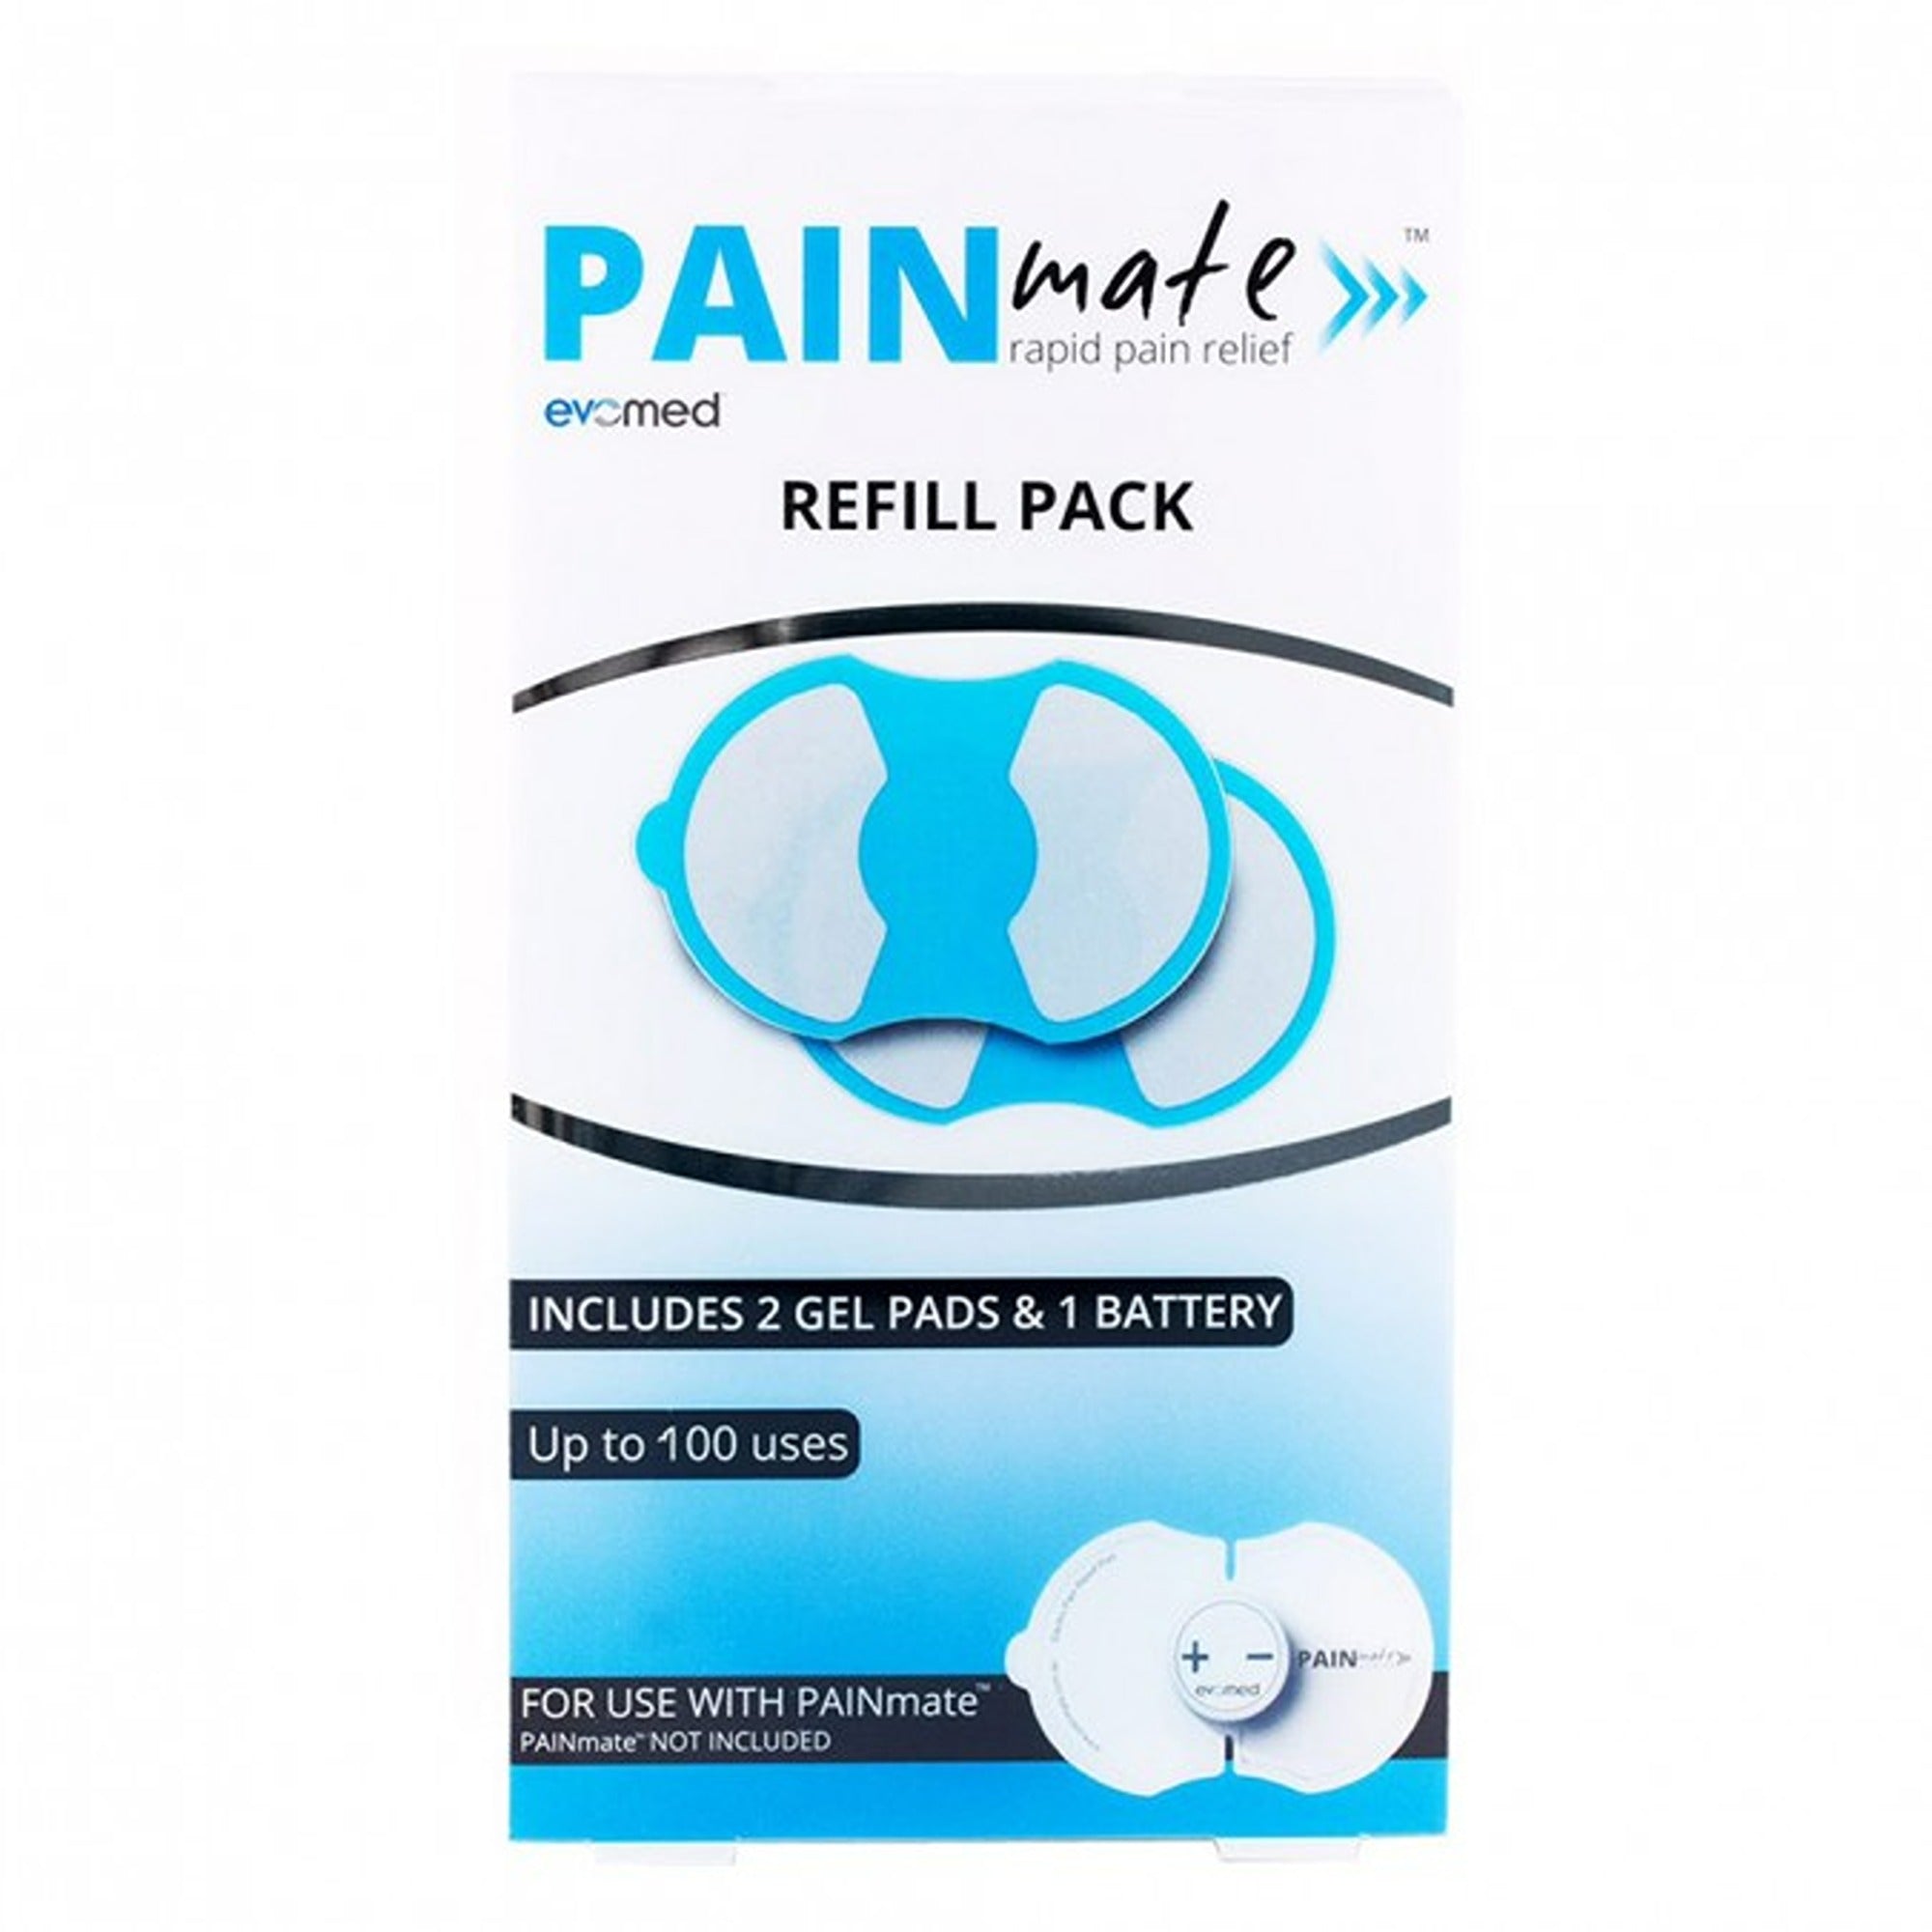 PainMATE refill